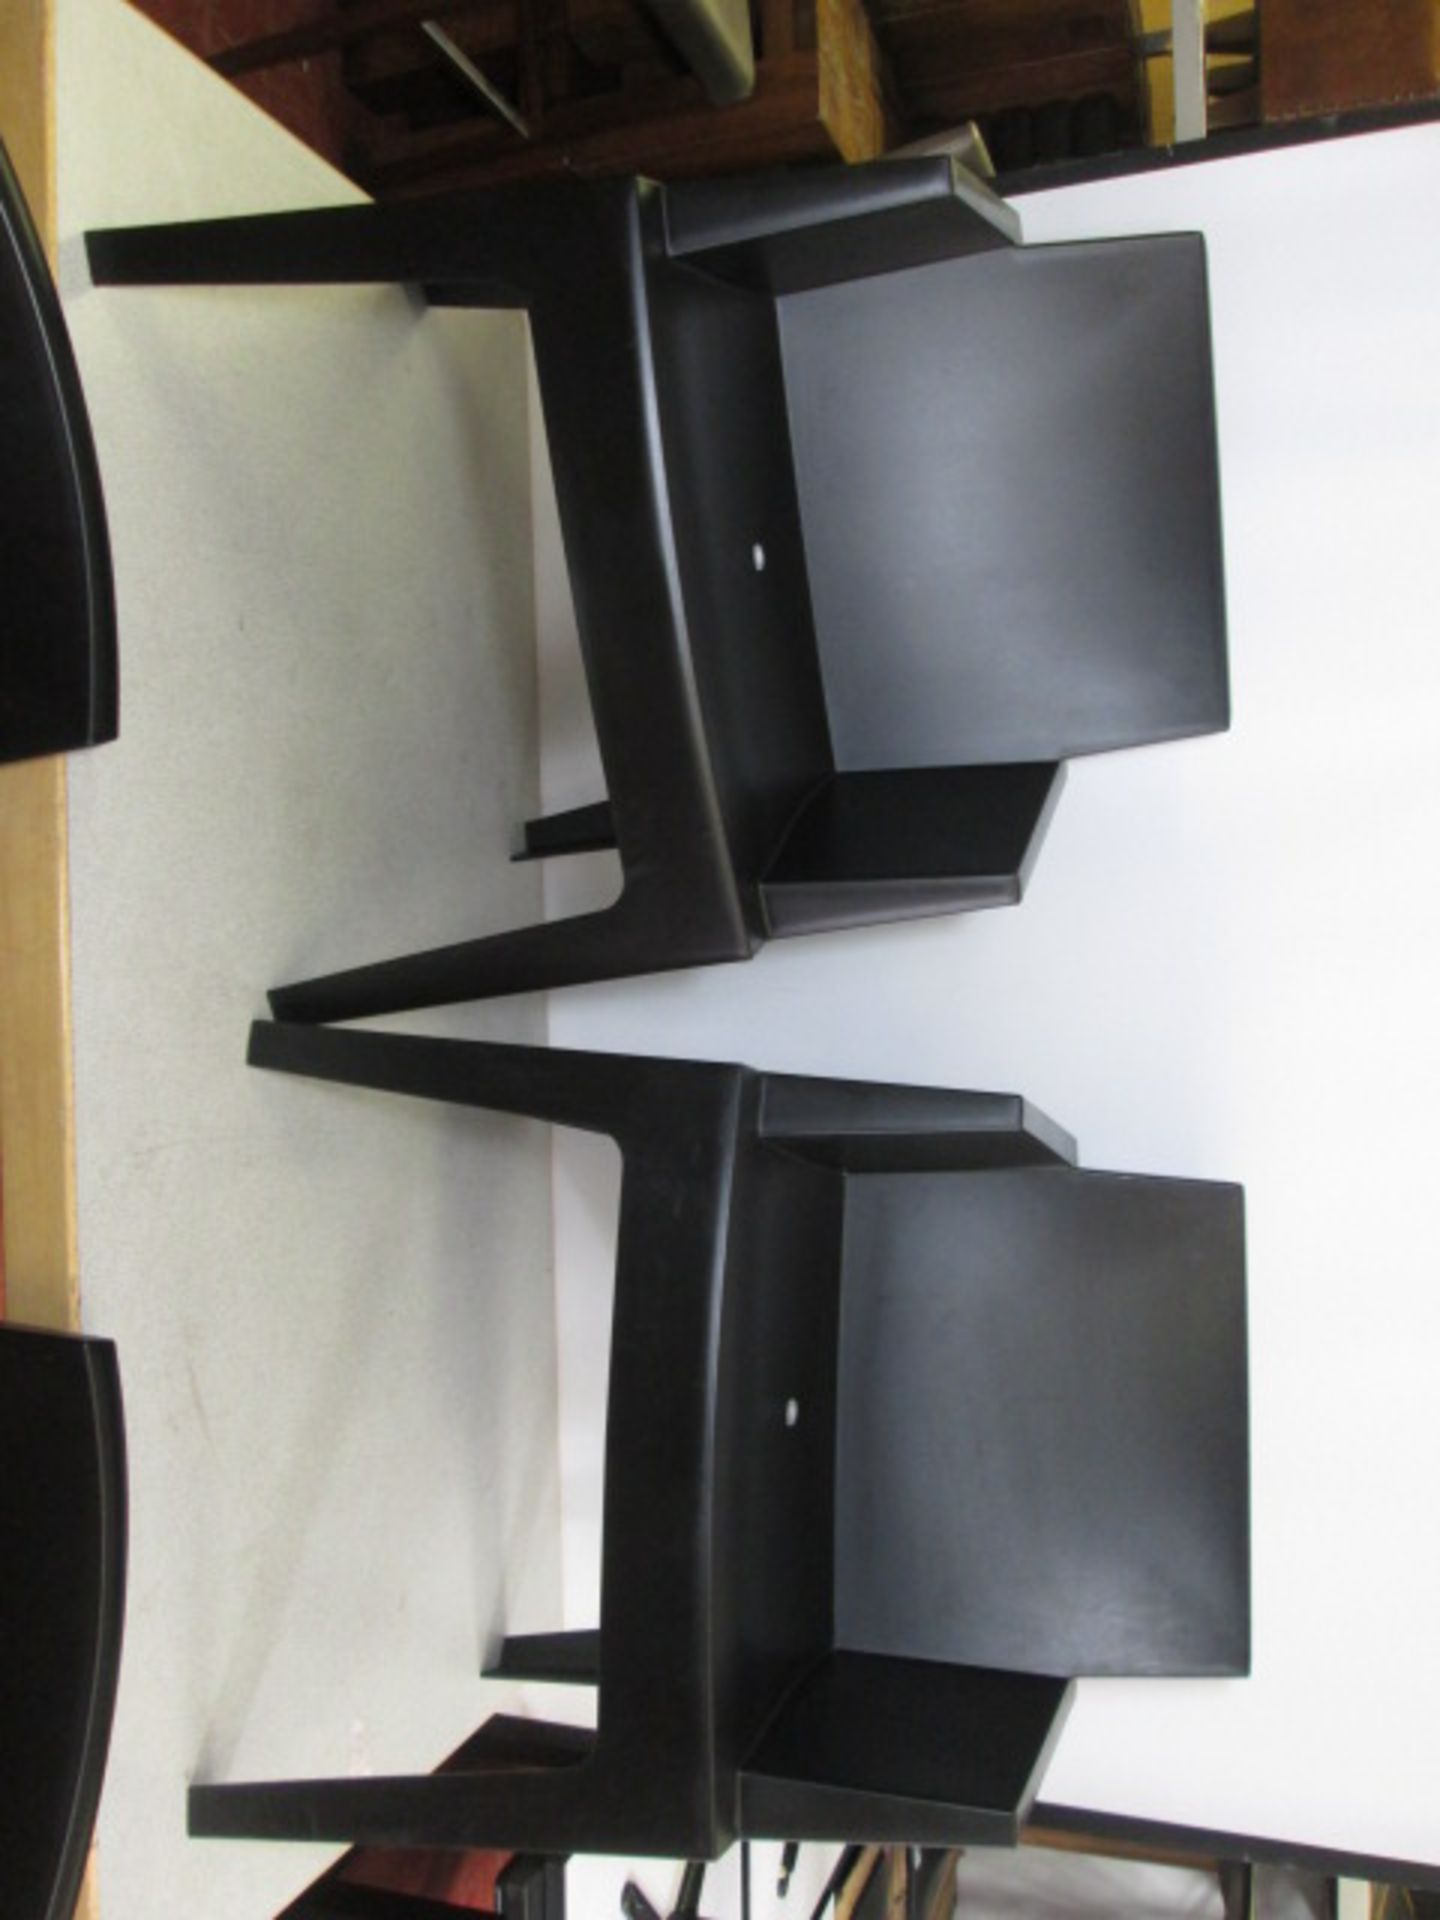 4 x Siesta Recyclable Polypropylene Stacking Outdoor Armchair in Matt Black, Model 058 Box. Comes - Image 2 of 9